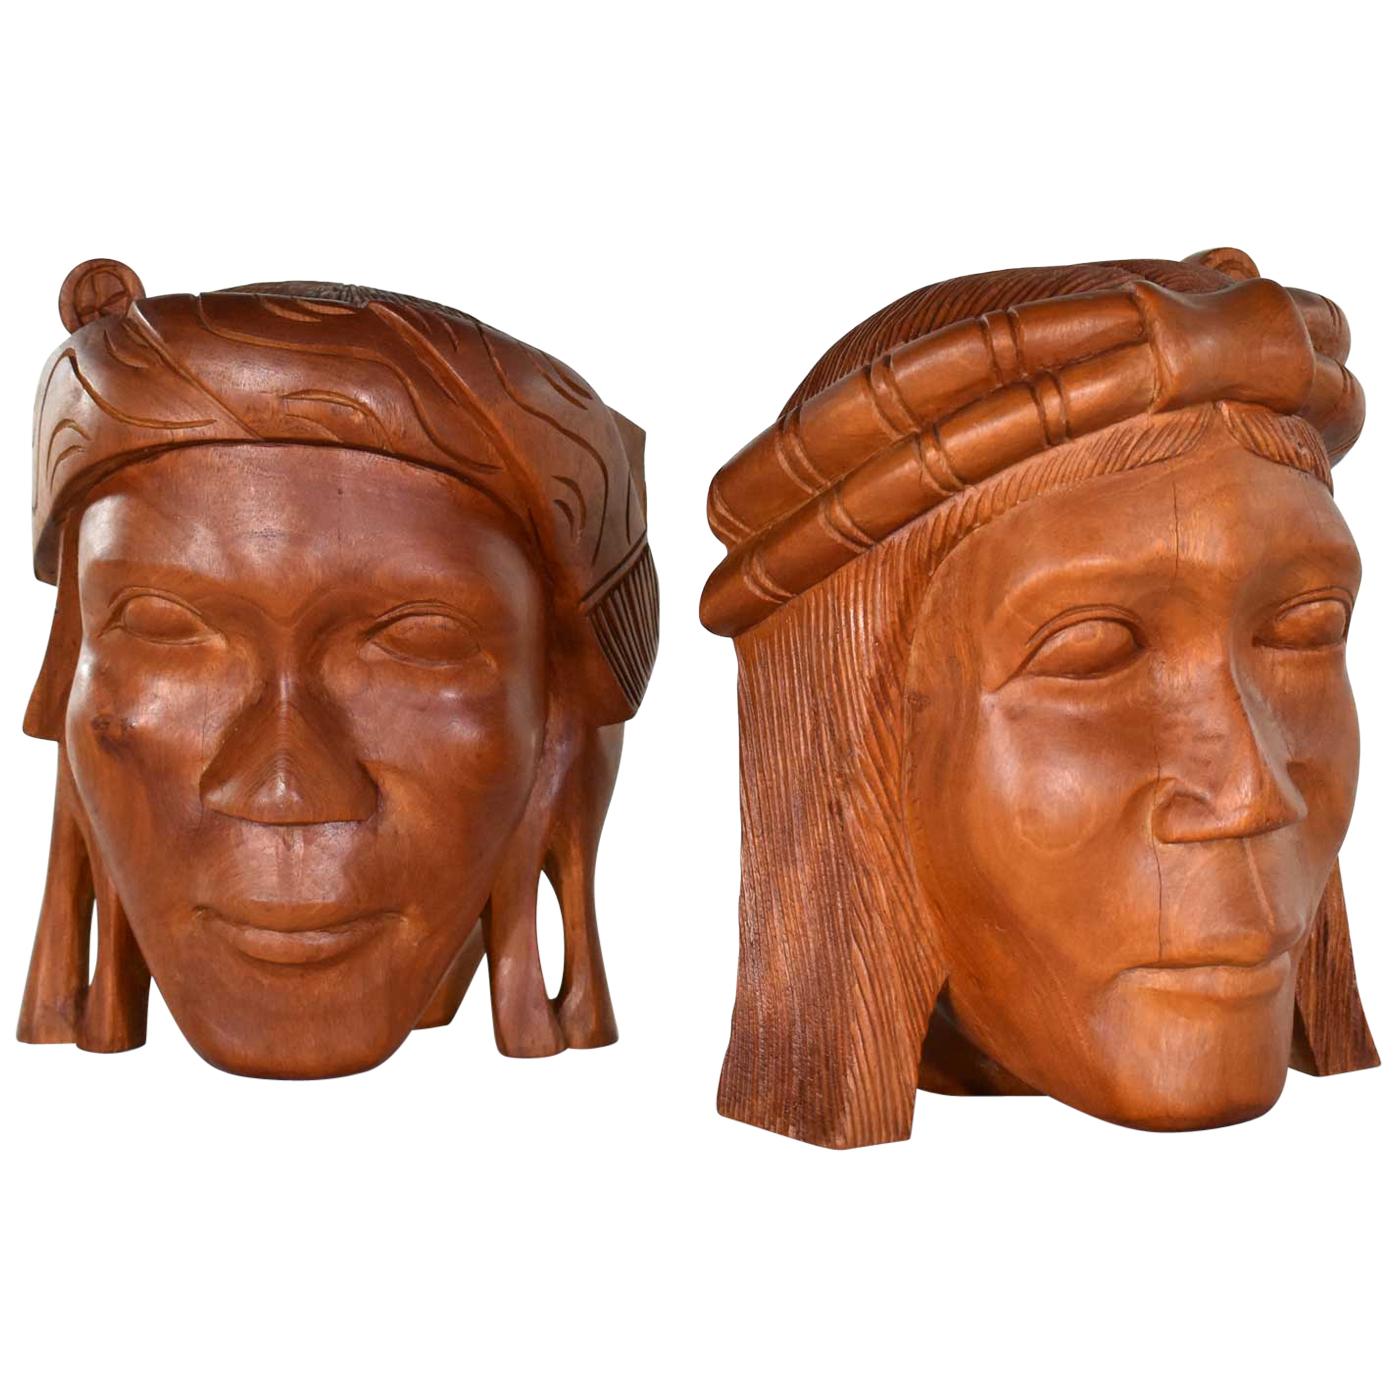 Vintage Tribal Carved Wood Figural Bookends Heads Only